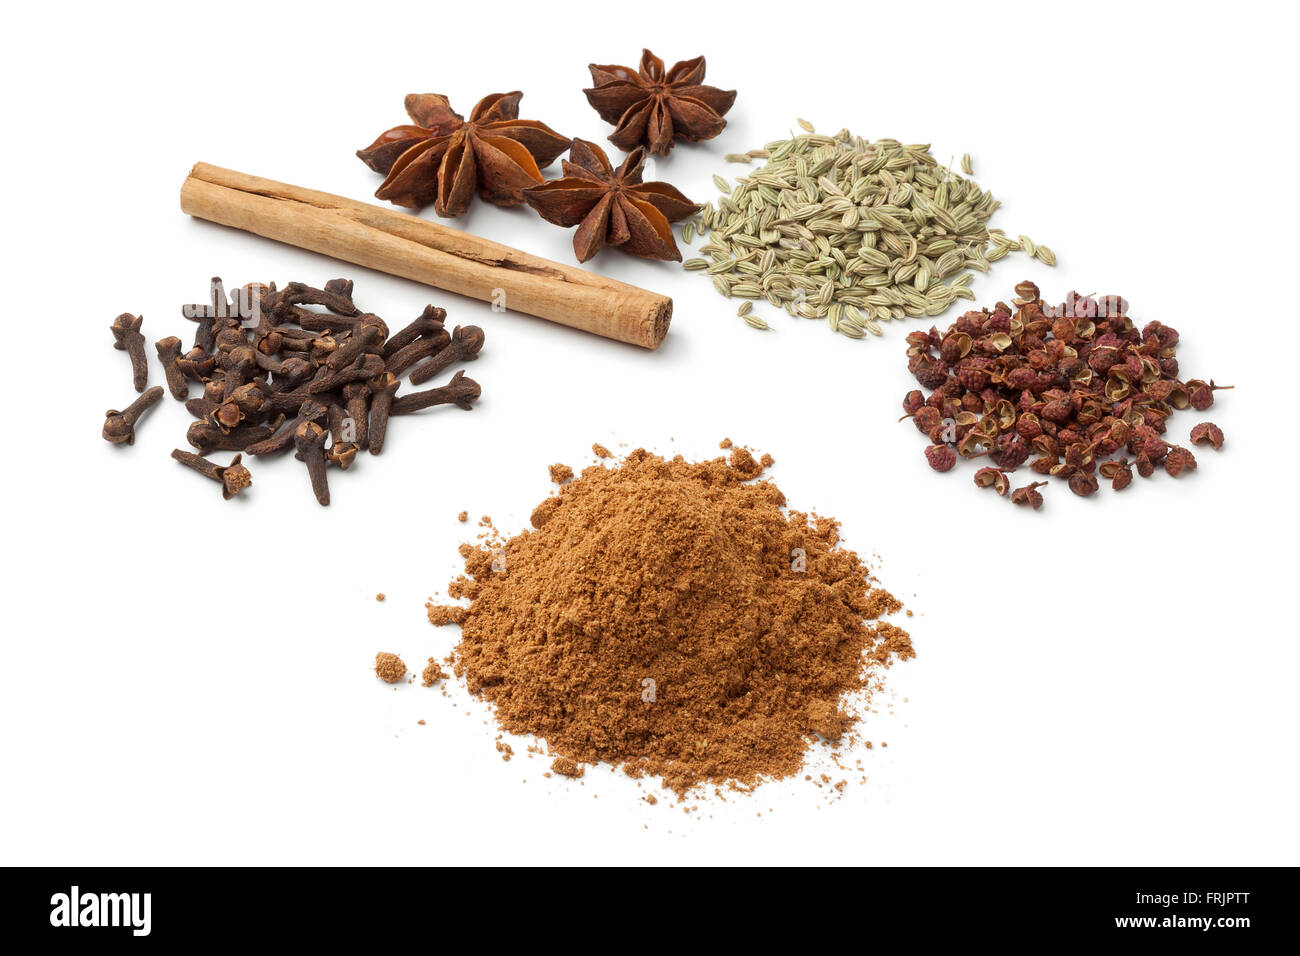 Five spices on white background to make five-spice powder Stock Photo